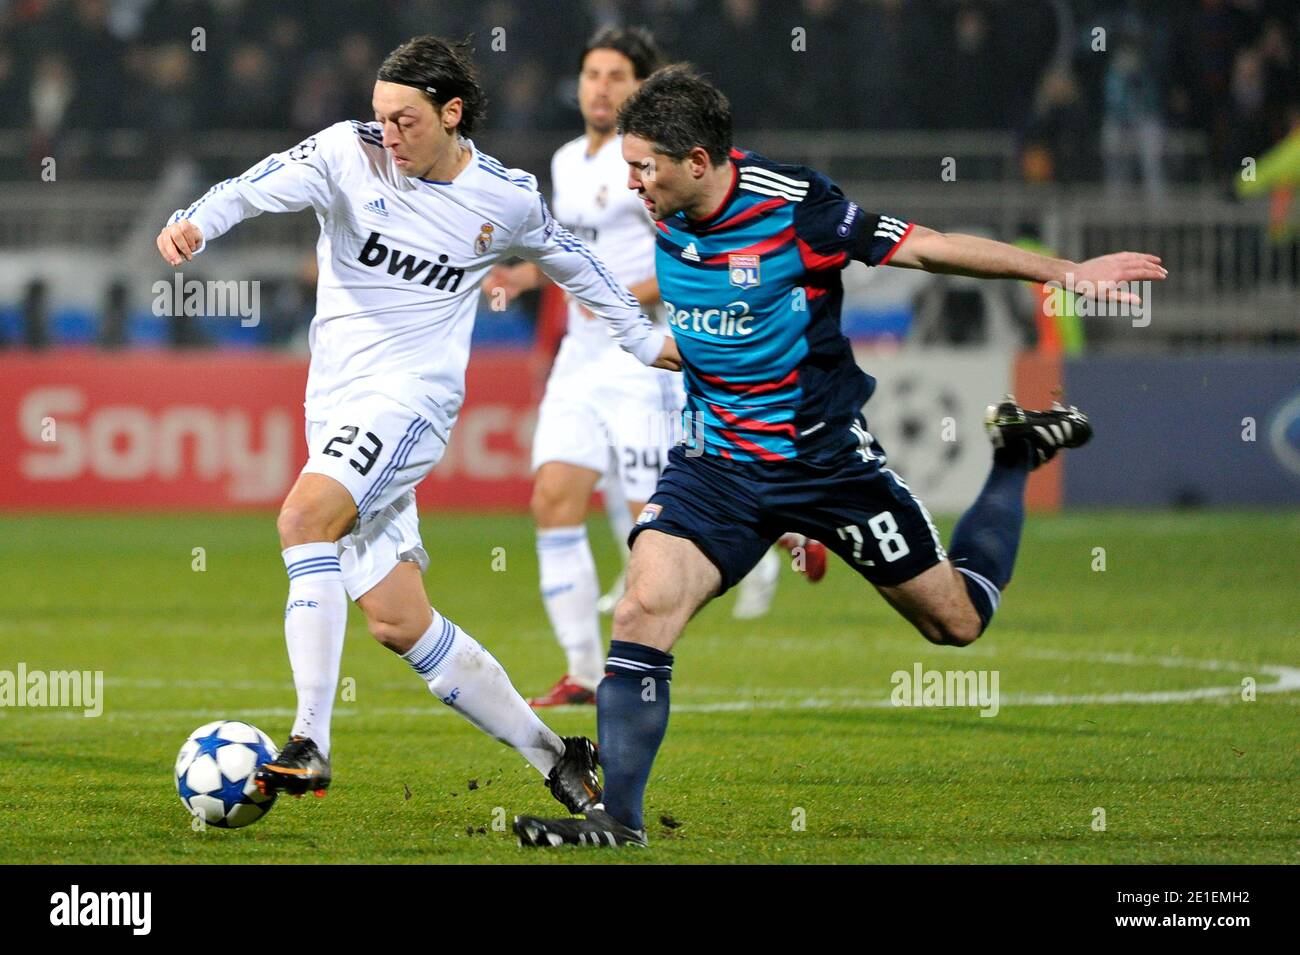 Jeremy Toulalan of Lyon and Mesut Ozil of Real Madrid during the Champions League match between Olympique Lyonnais and Real Madrid CF at Stade Gerland on February 22, 2011 in Lyon, France. Photo by Stephane Reix/ABACAPRESS.COM Stock Photo